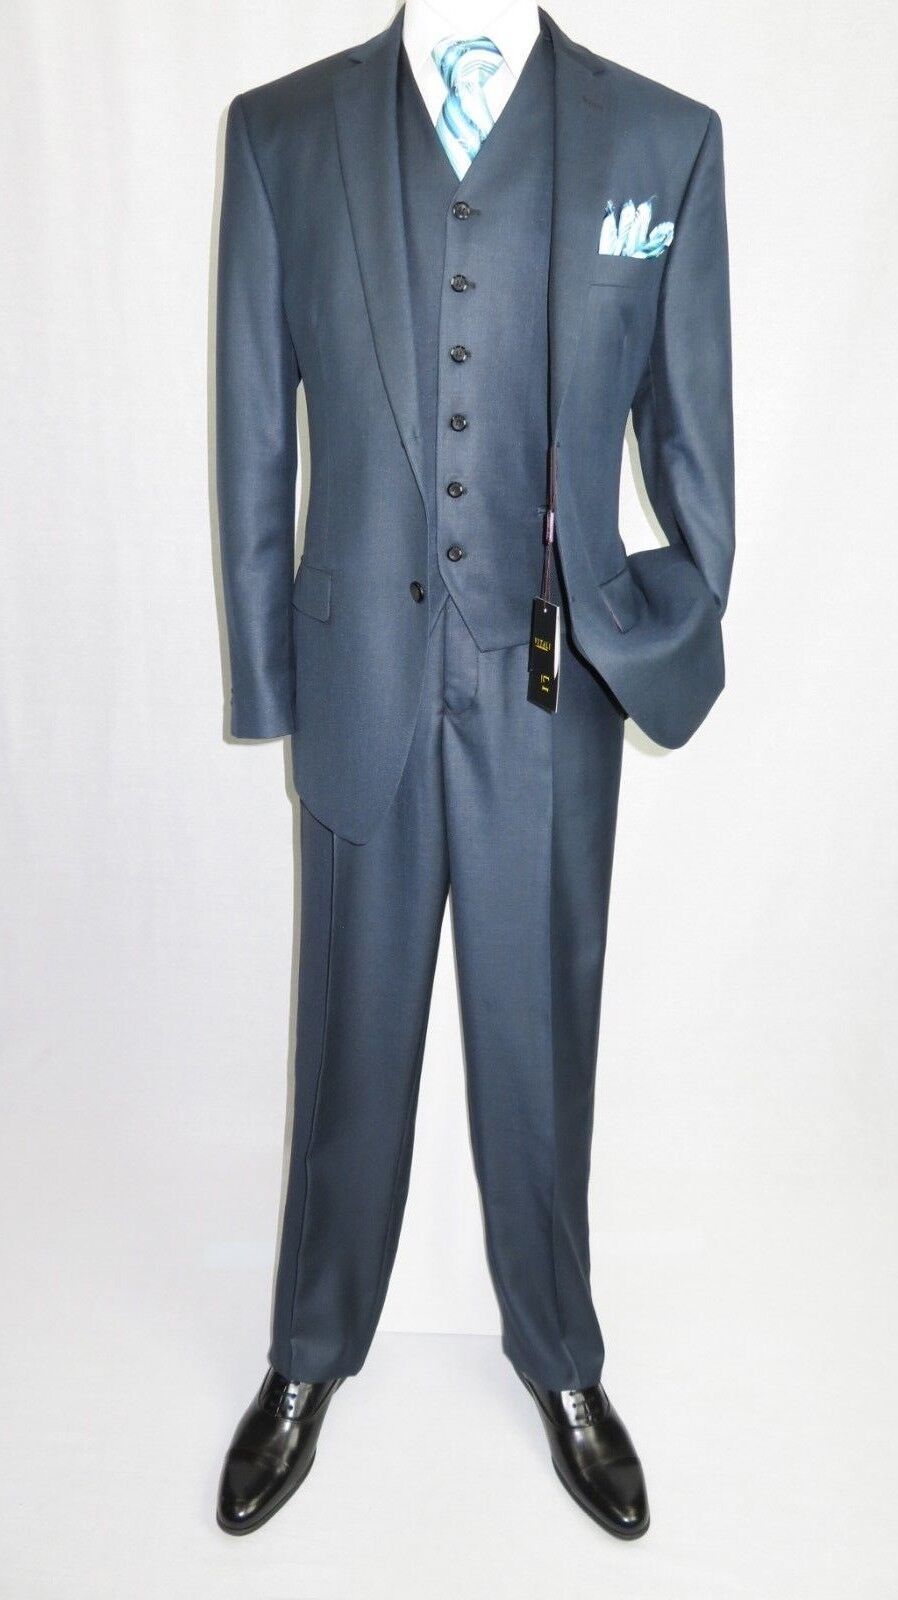 Primary image for Mens Vitali Three Piece Suit Vested Sheen Sharkskin Business M3090 Navy blue